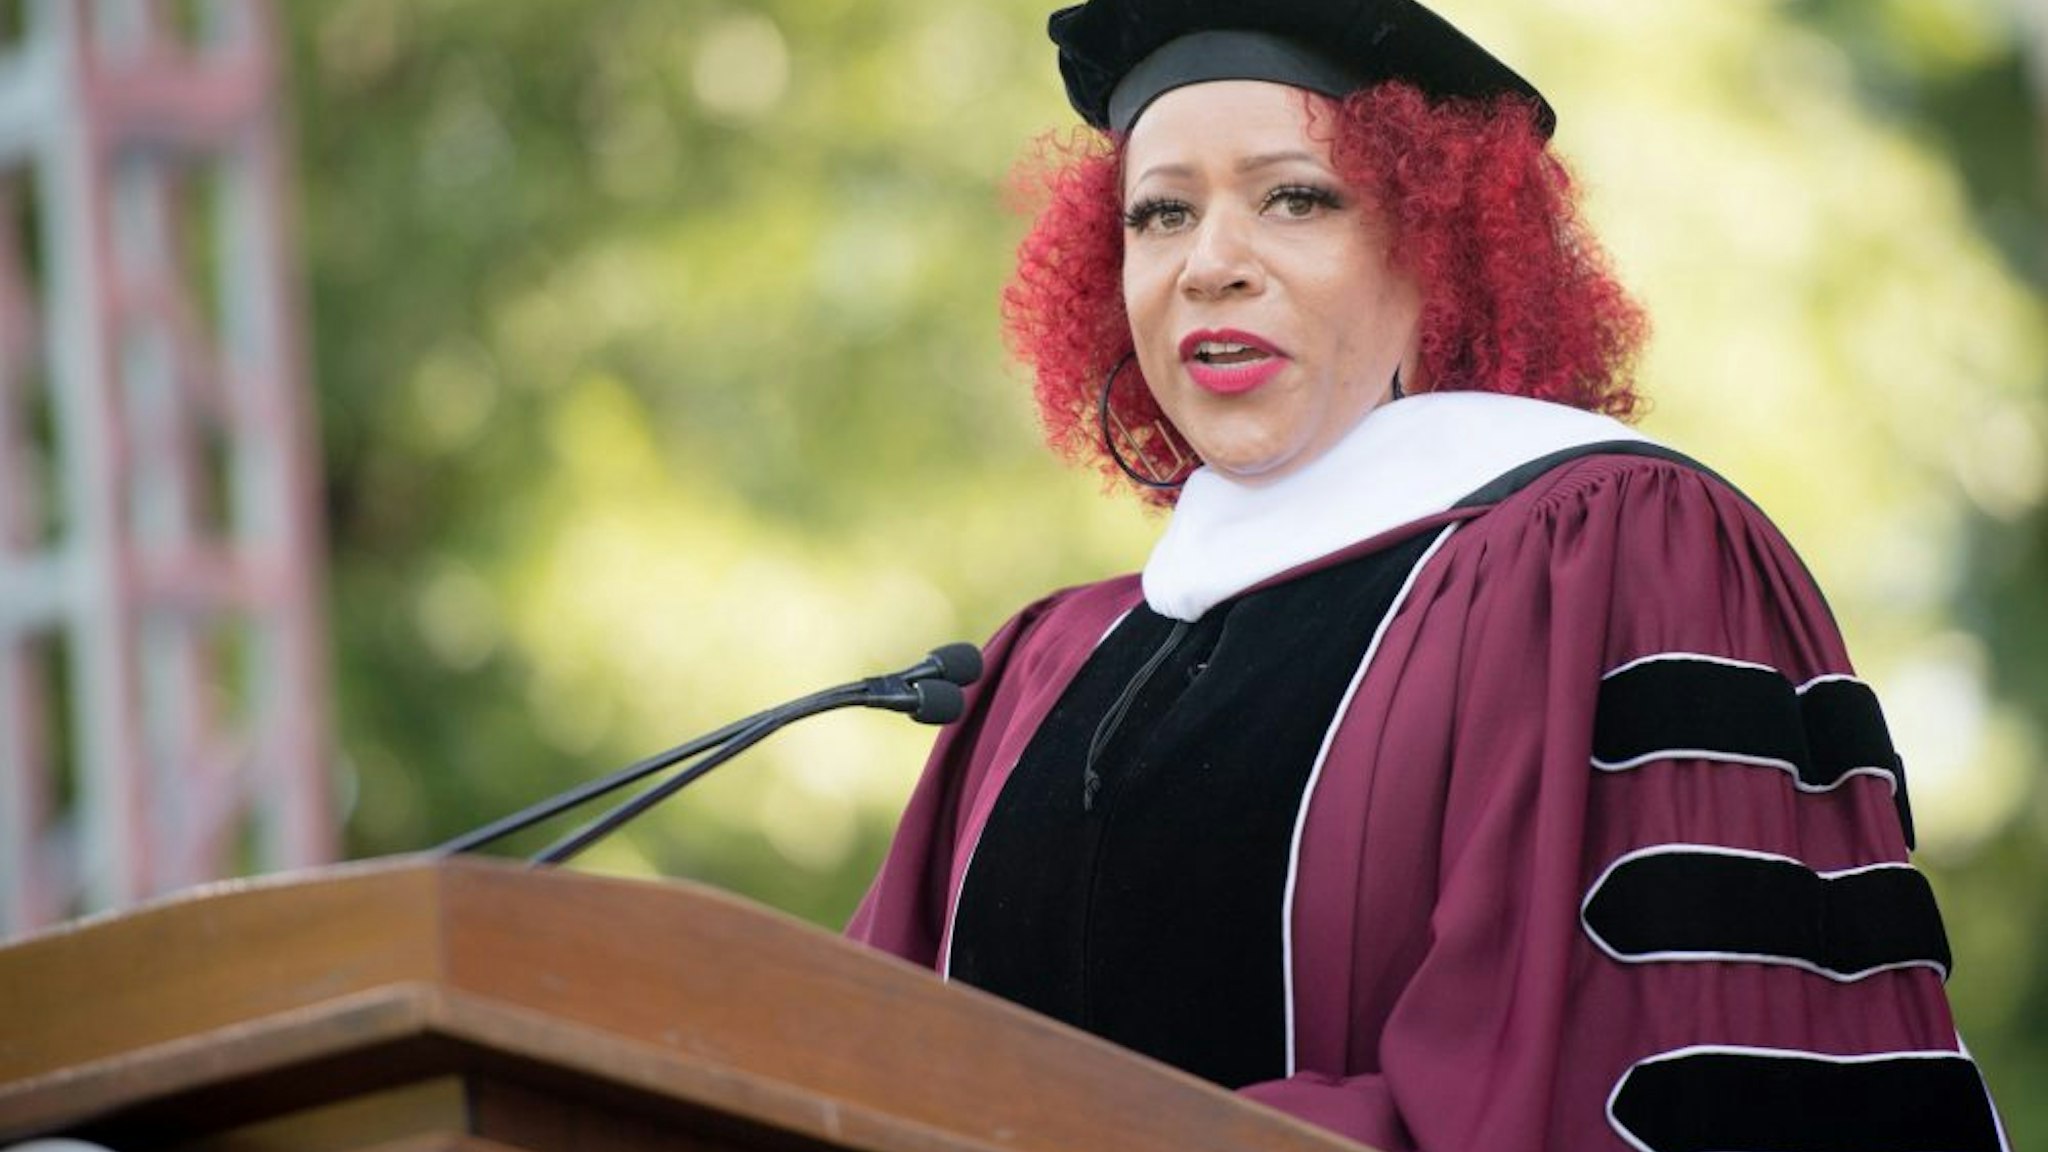 ATLANTA, GEORGIA - MAY 16: Author Nikole Hannah-Jones speaks on stage during the 137th Commencement at Morehouse College on May 16, 2021 in Atlanta, Georgia.